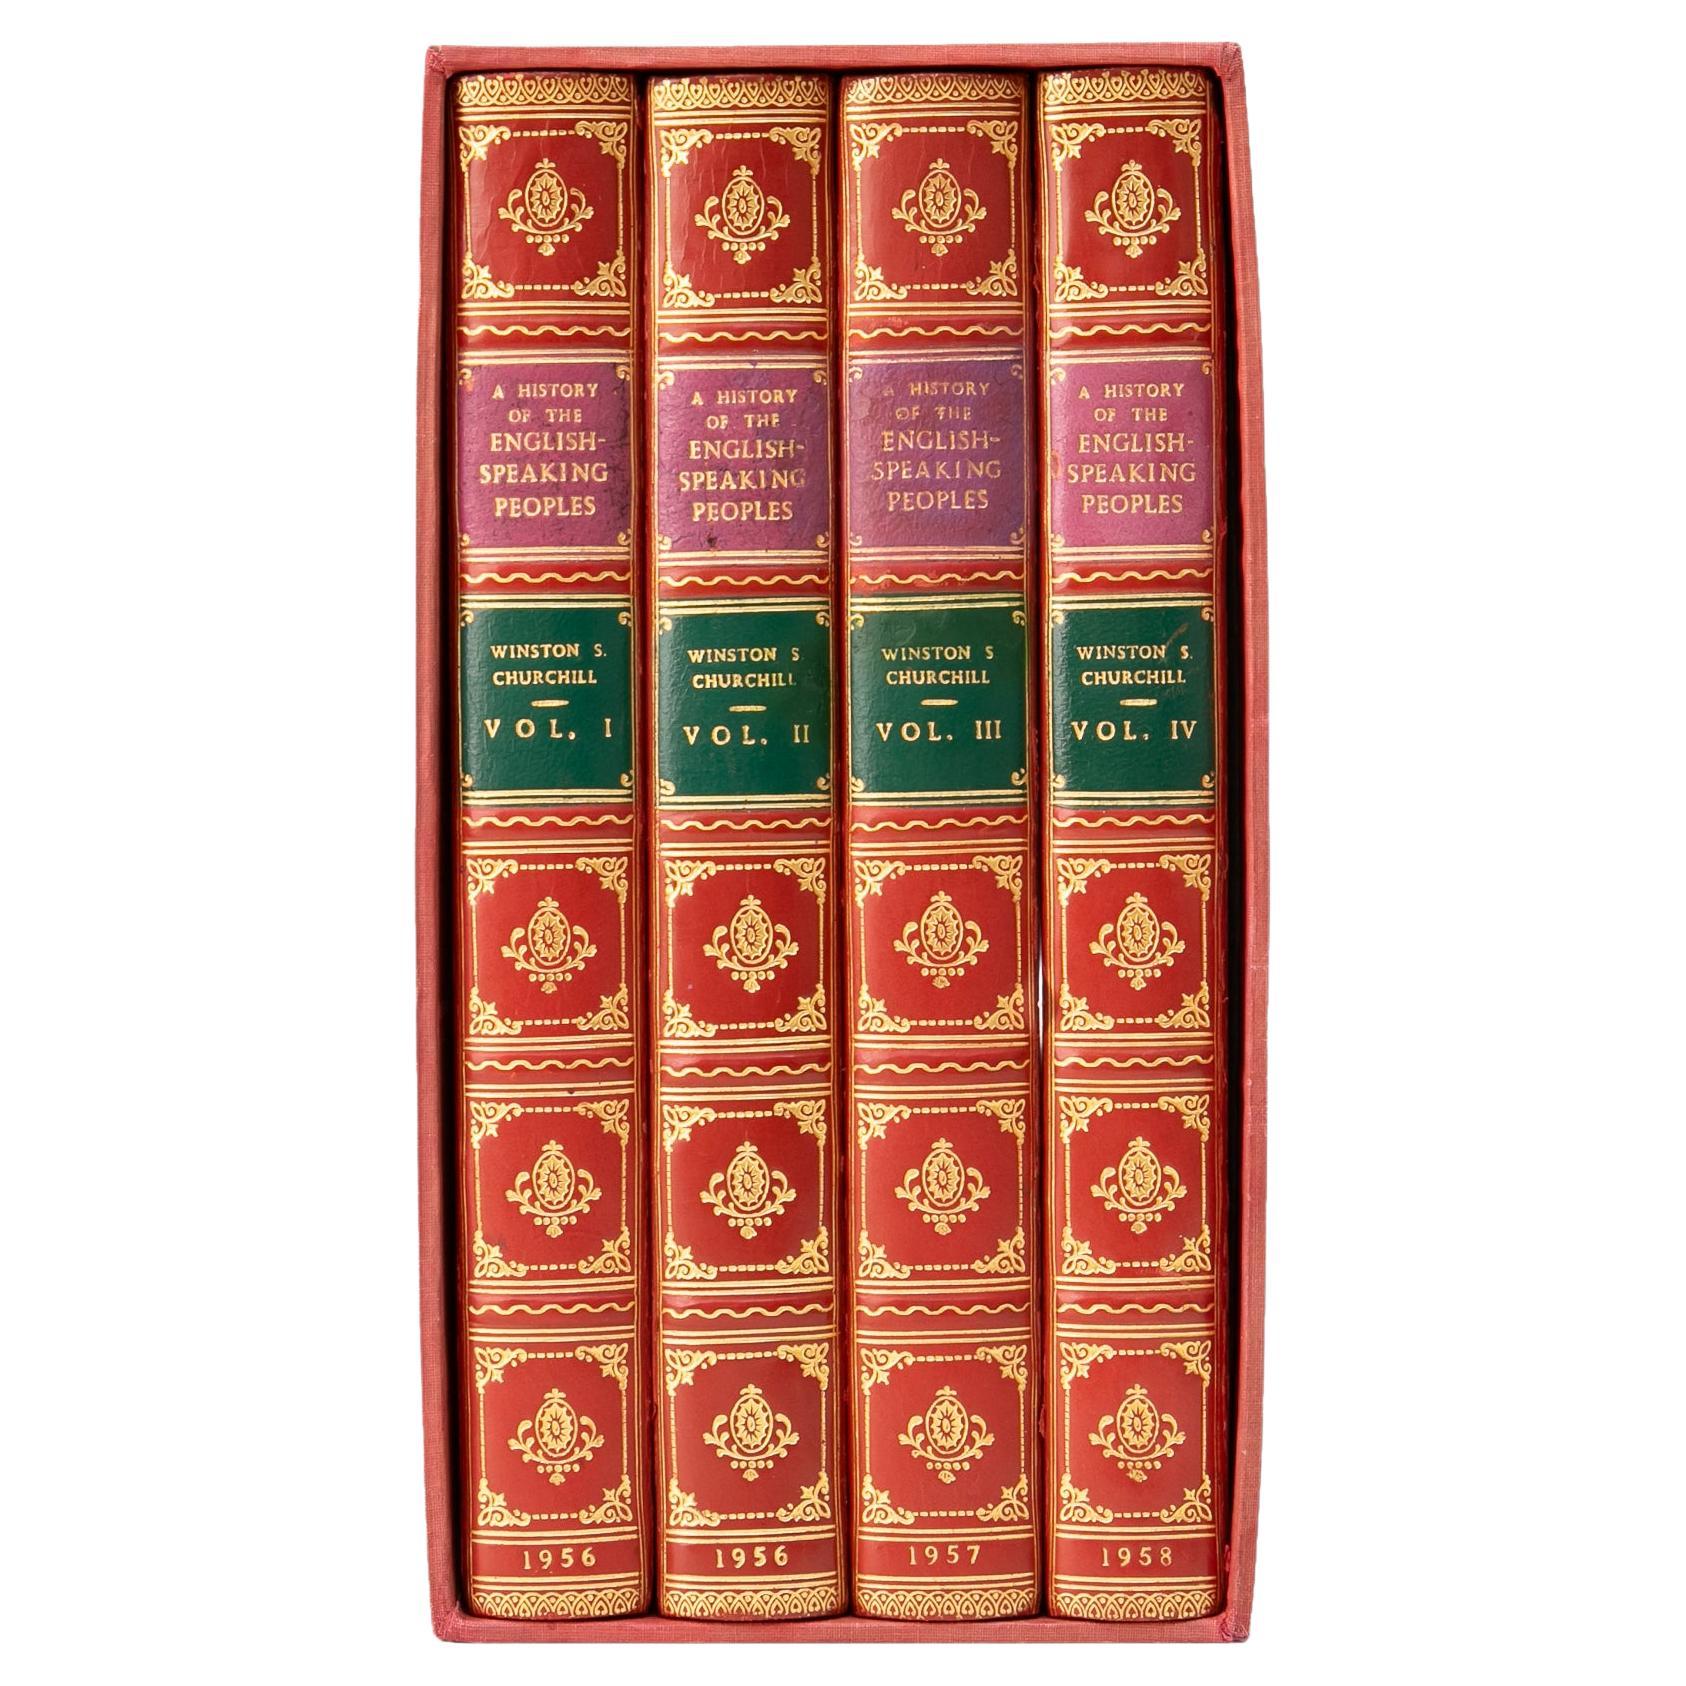 4 Volumes. Winston Churchill, A History of English Speaking Peoples